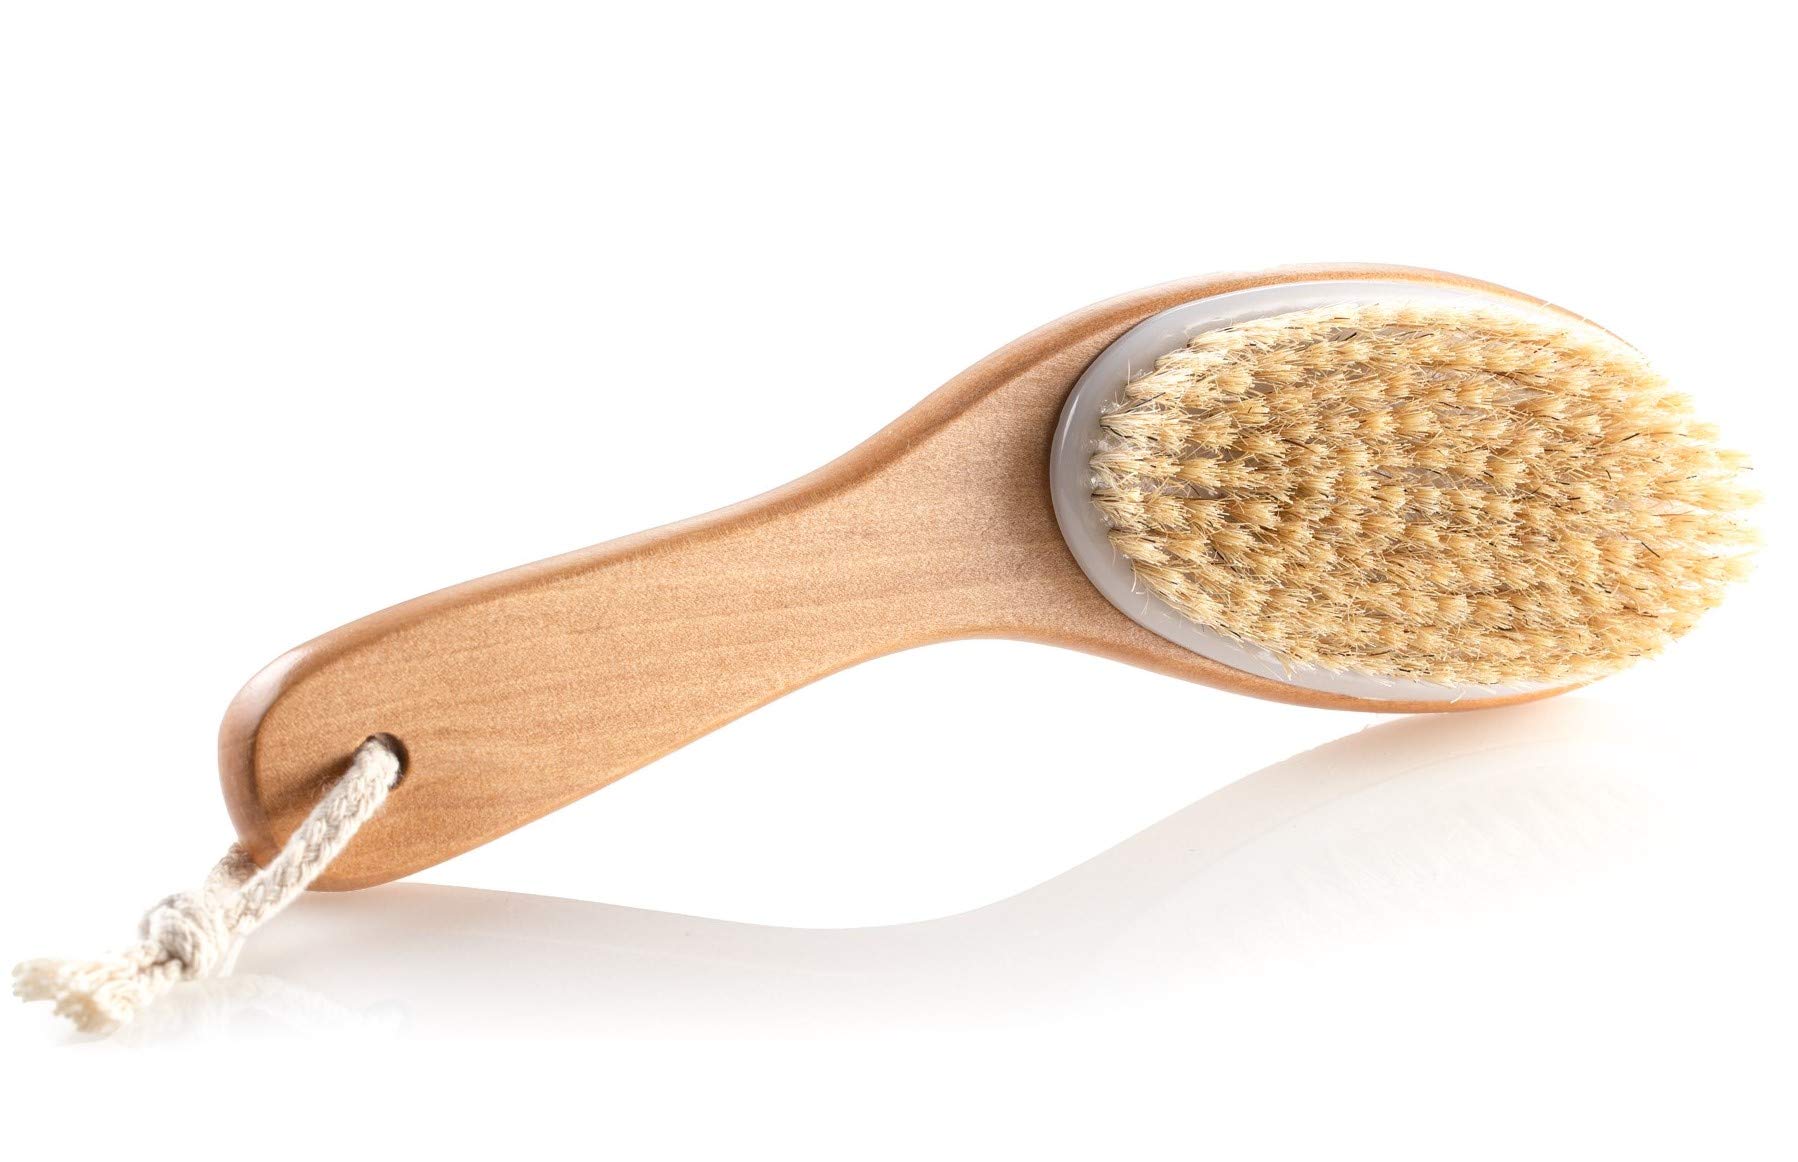 100% Natural Boar Bristle Body Brush with Contoured Wooden Handle by TOUCH ME